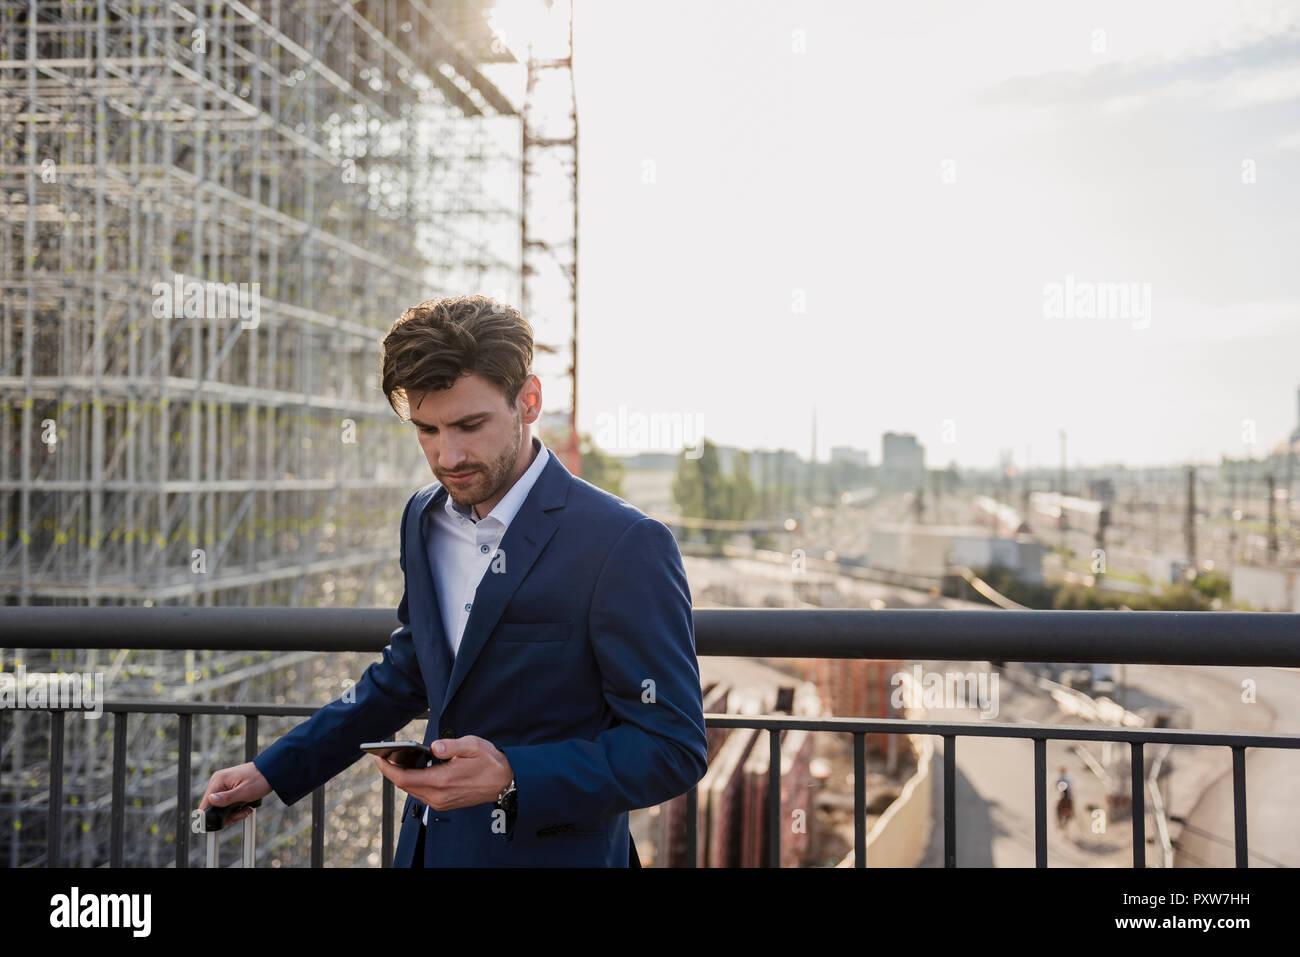 Businessman standing on bridge in the city using cell phone Stock Photo